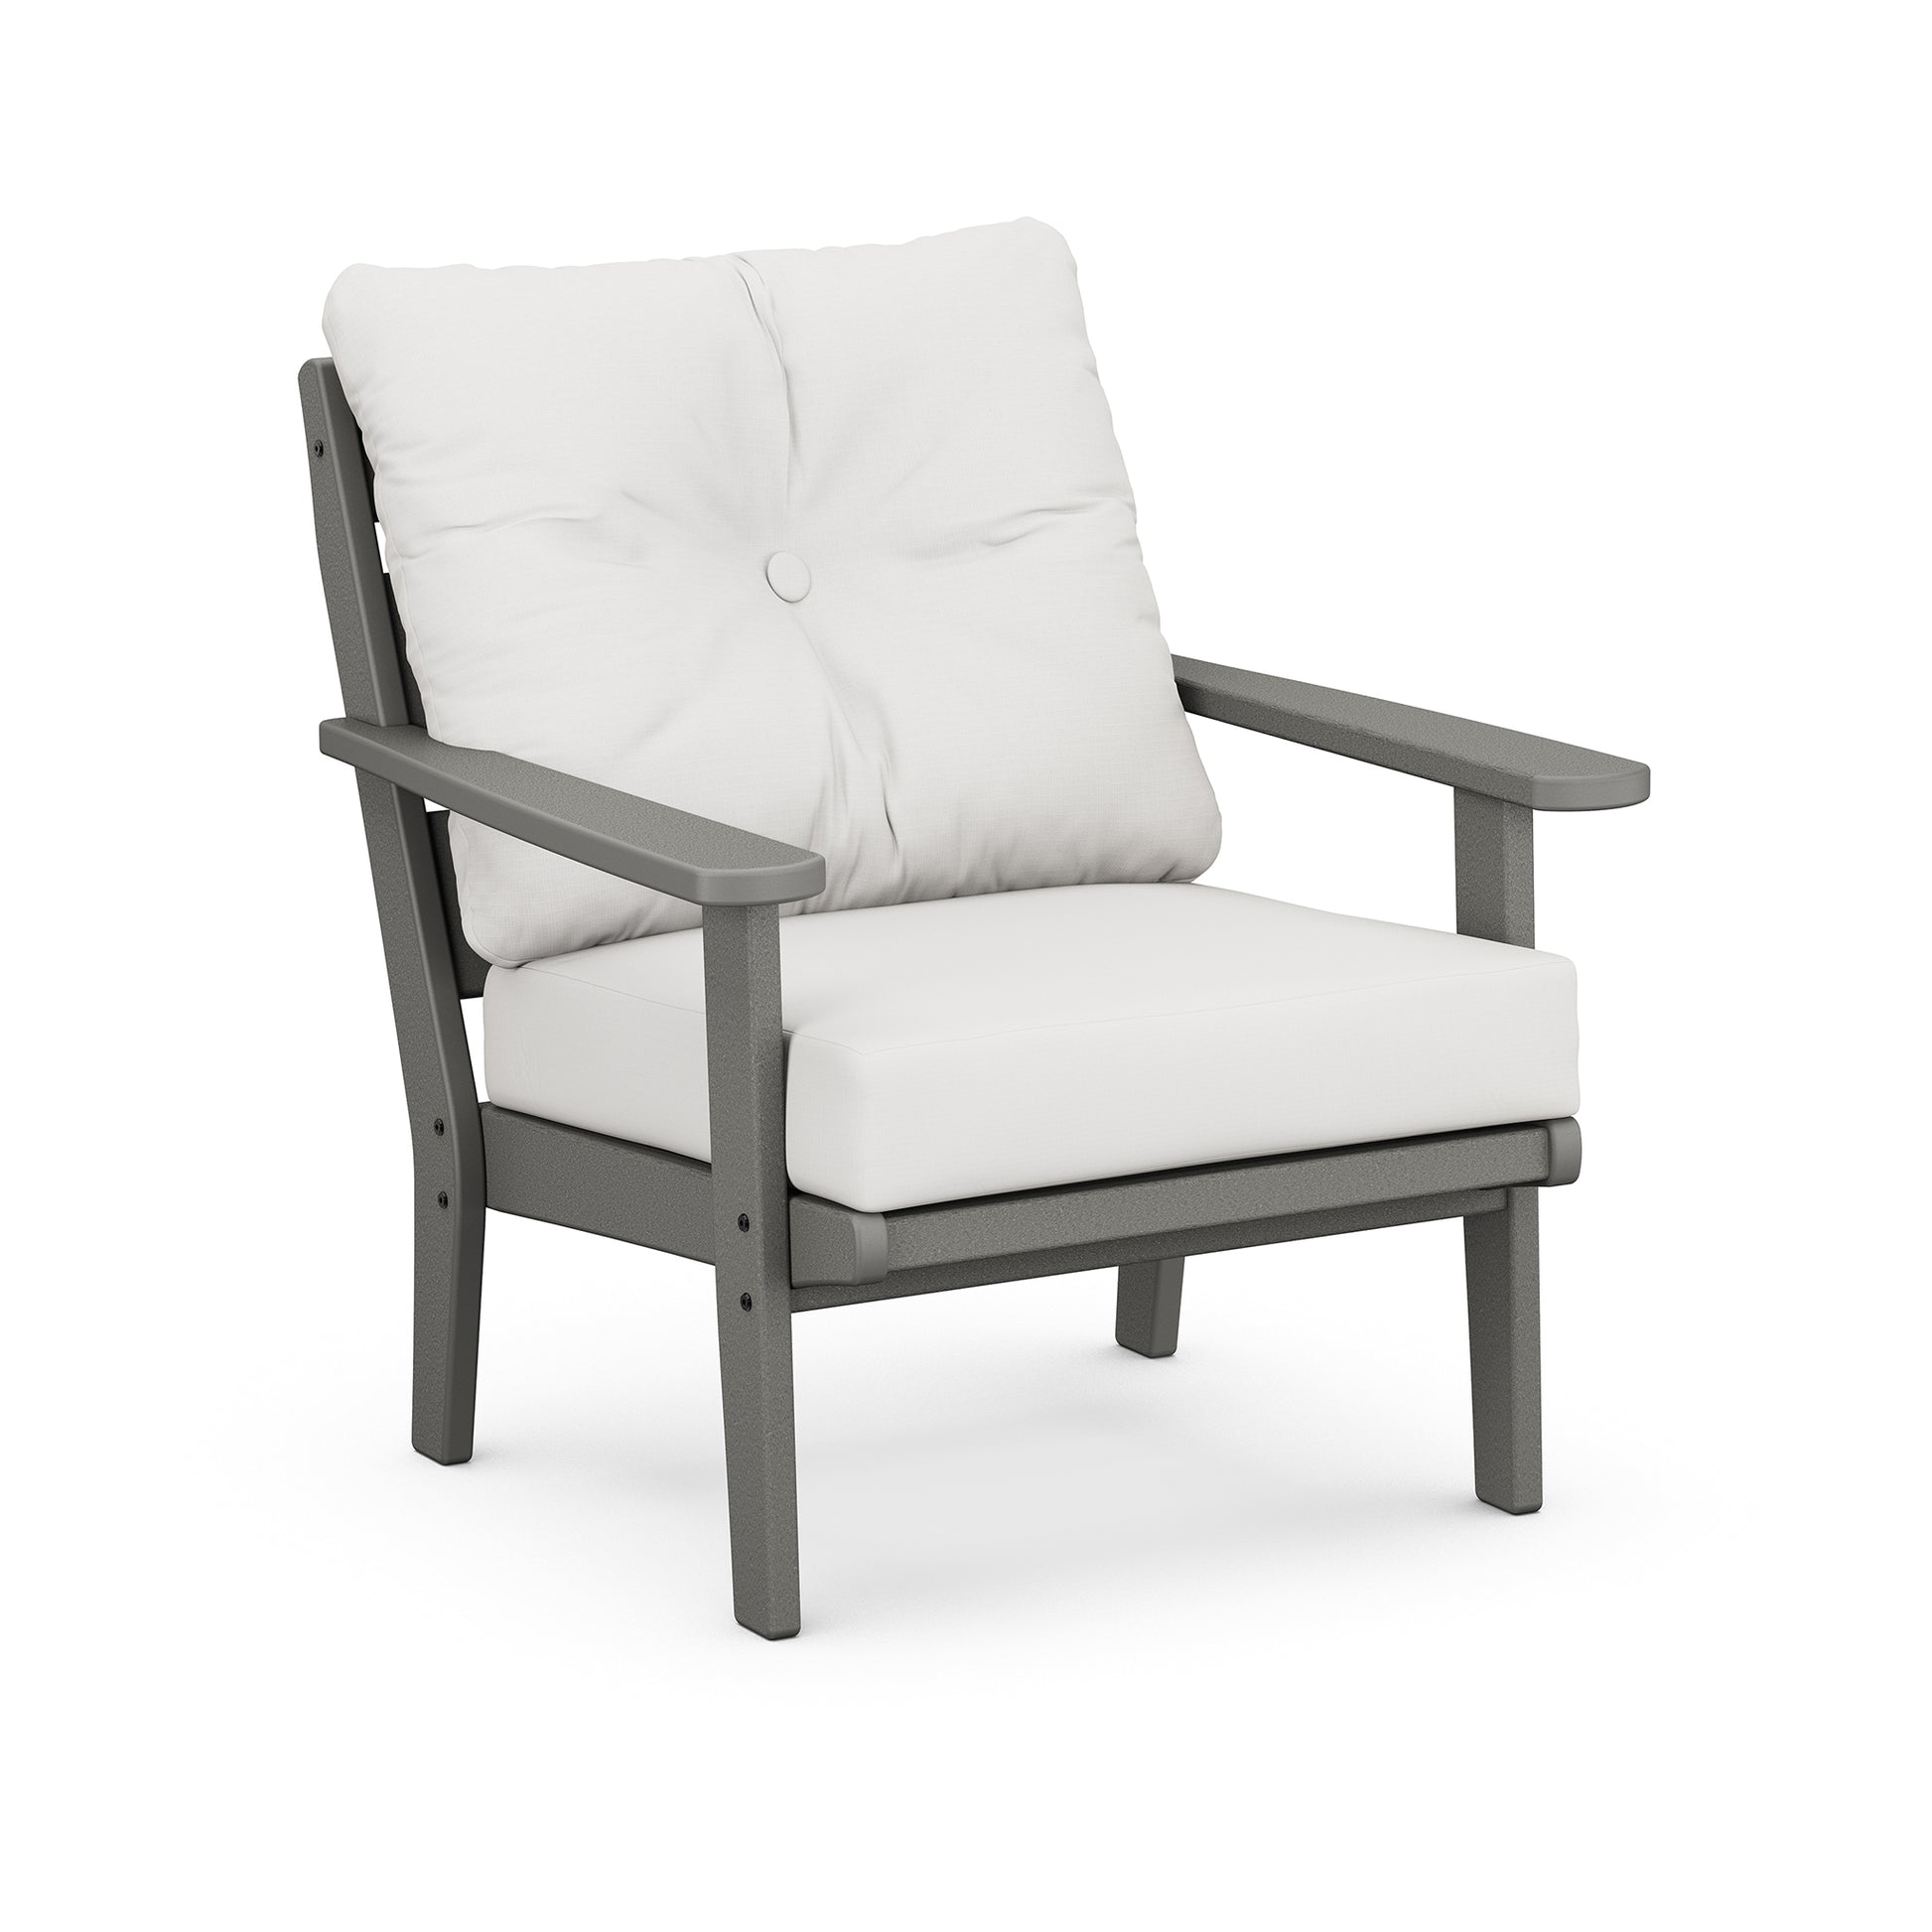 A modern all-weather outdoor chair with a gray metal frame and white cushions, isolated on a white background.(Product Name: POLYWOOD Lakeside Deep Seating Chair)